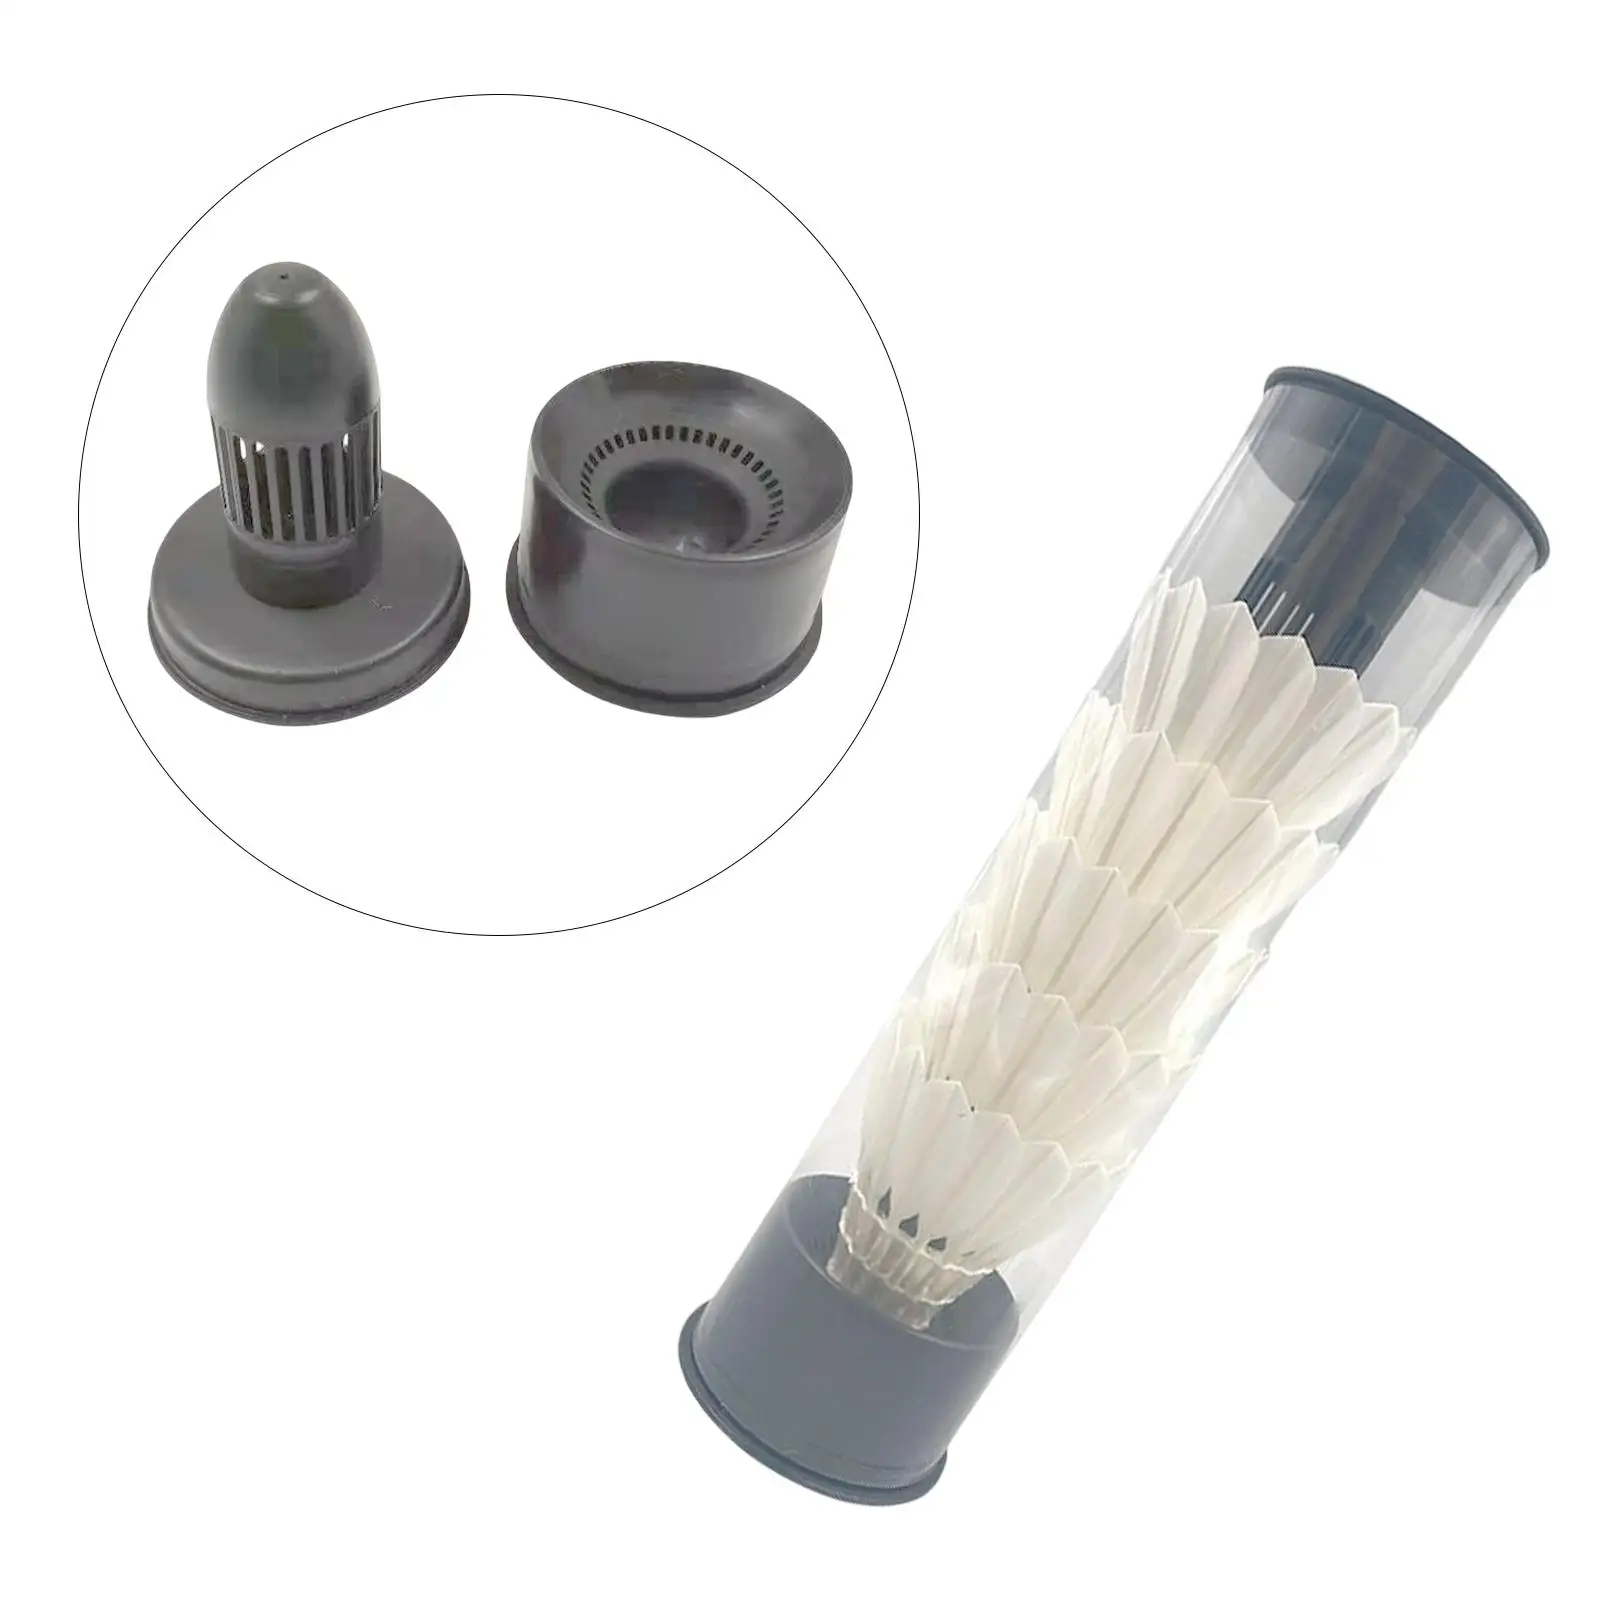  Feather Shuttlecock Humidifier Improve Beating Resistance, Shuttlecocks Badminton Storage Tube Cover 